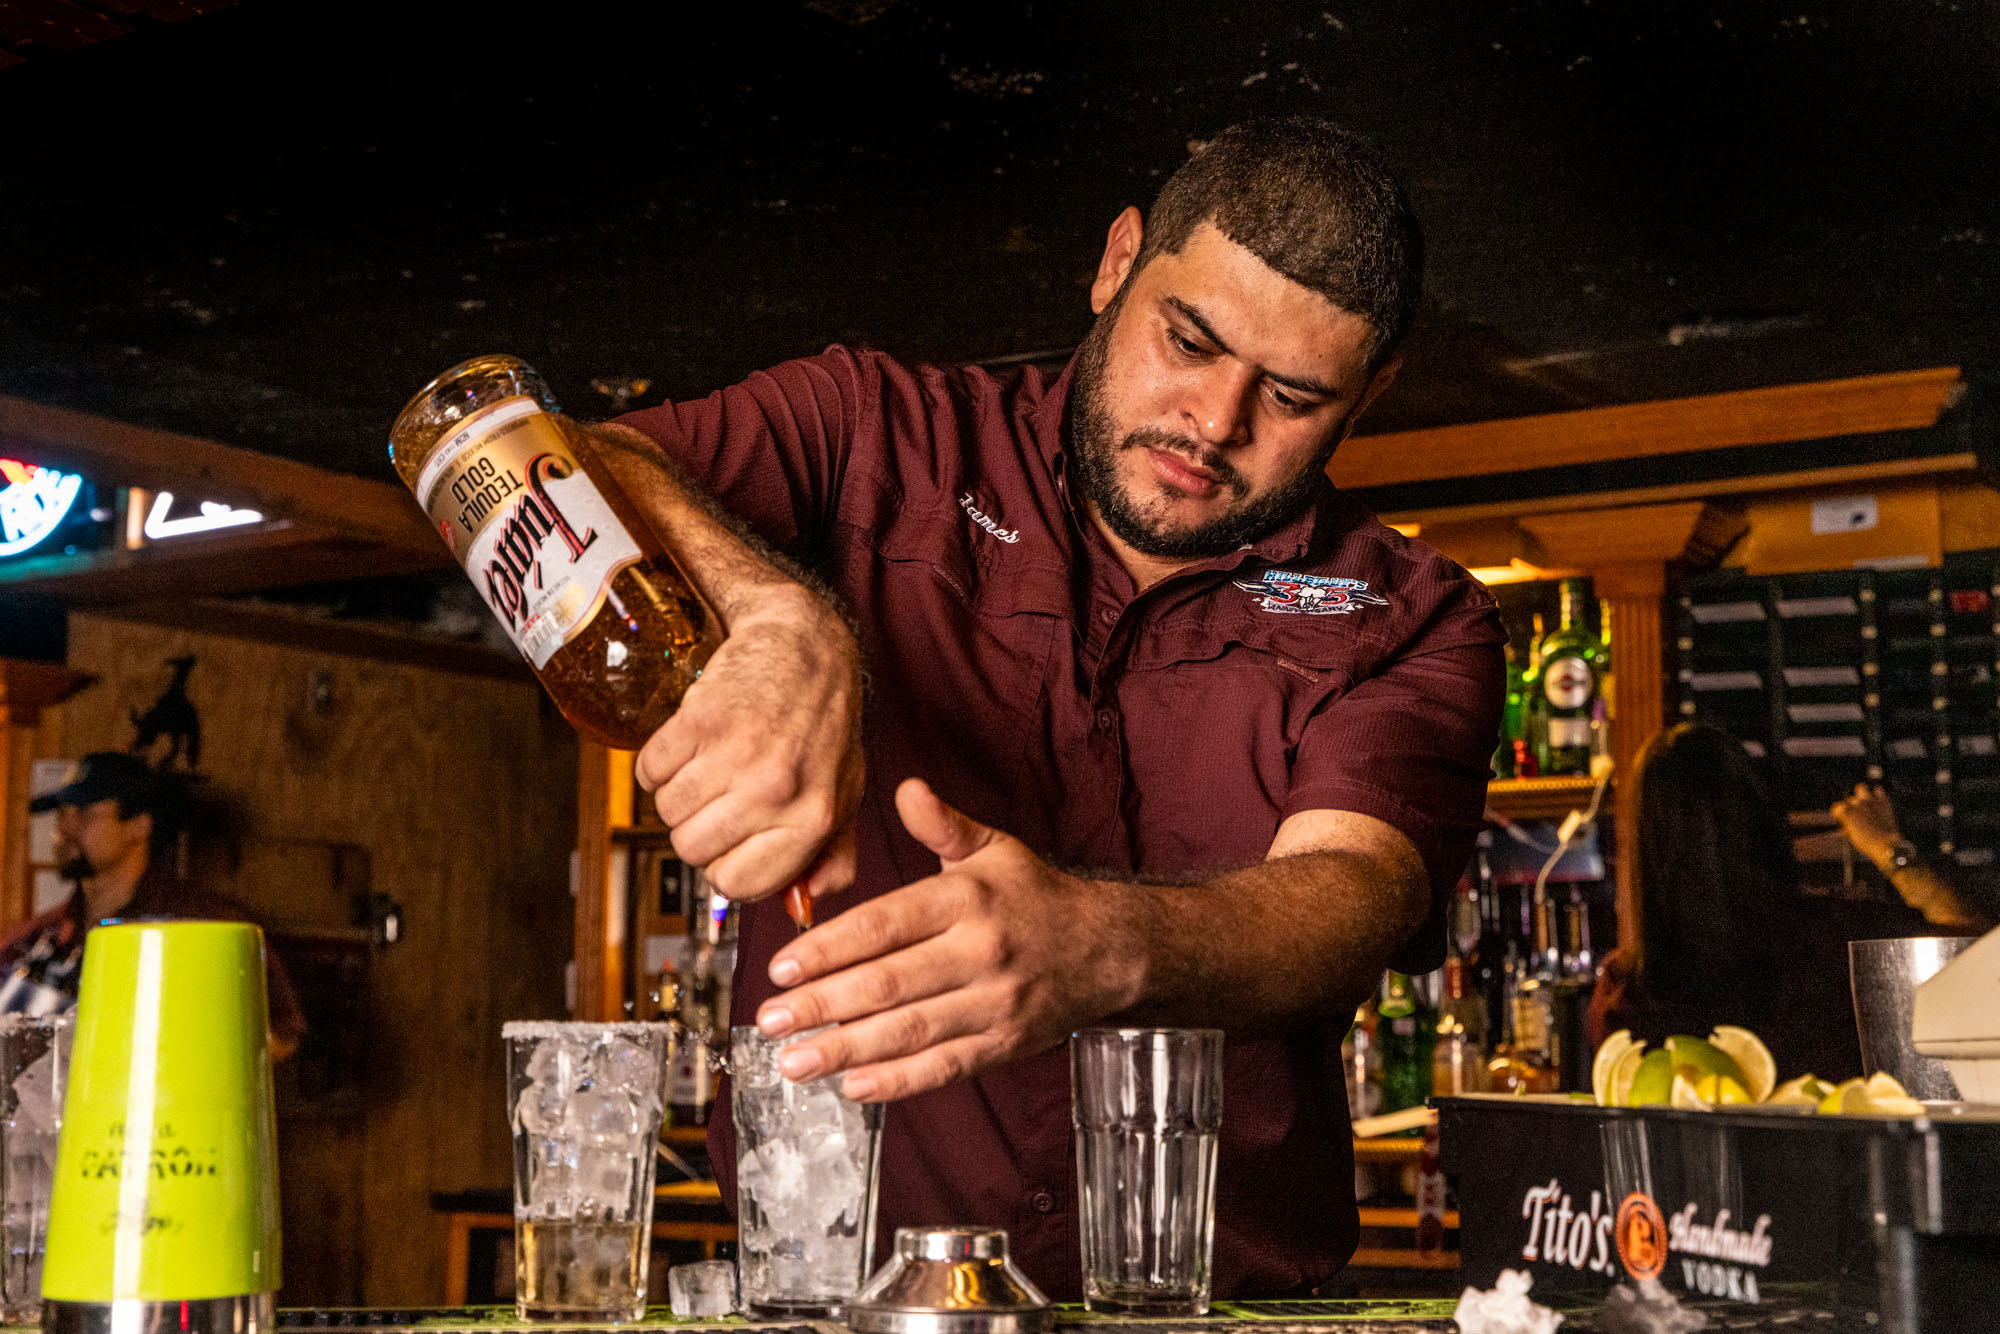 A man in a maroon shirt pouring an alcoholic beverage.